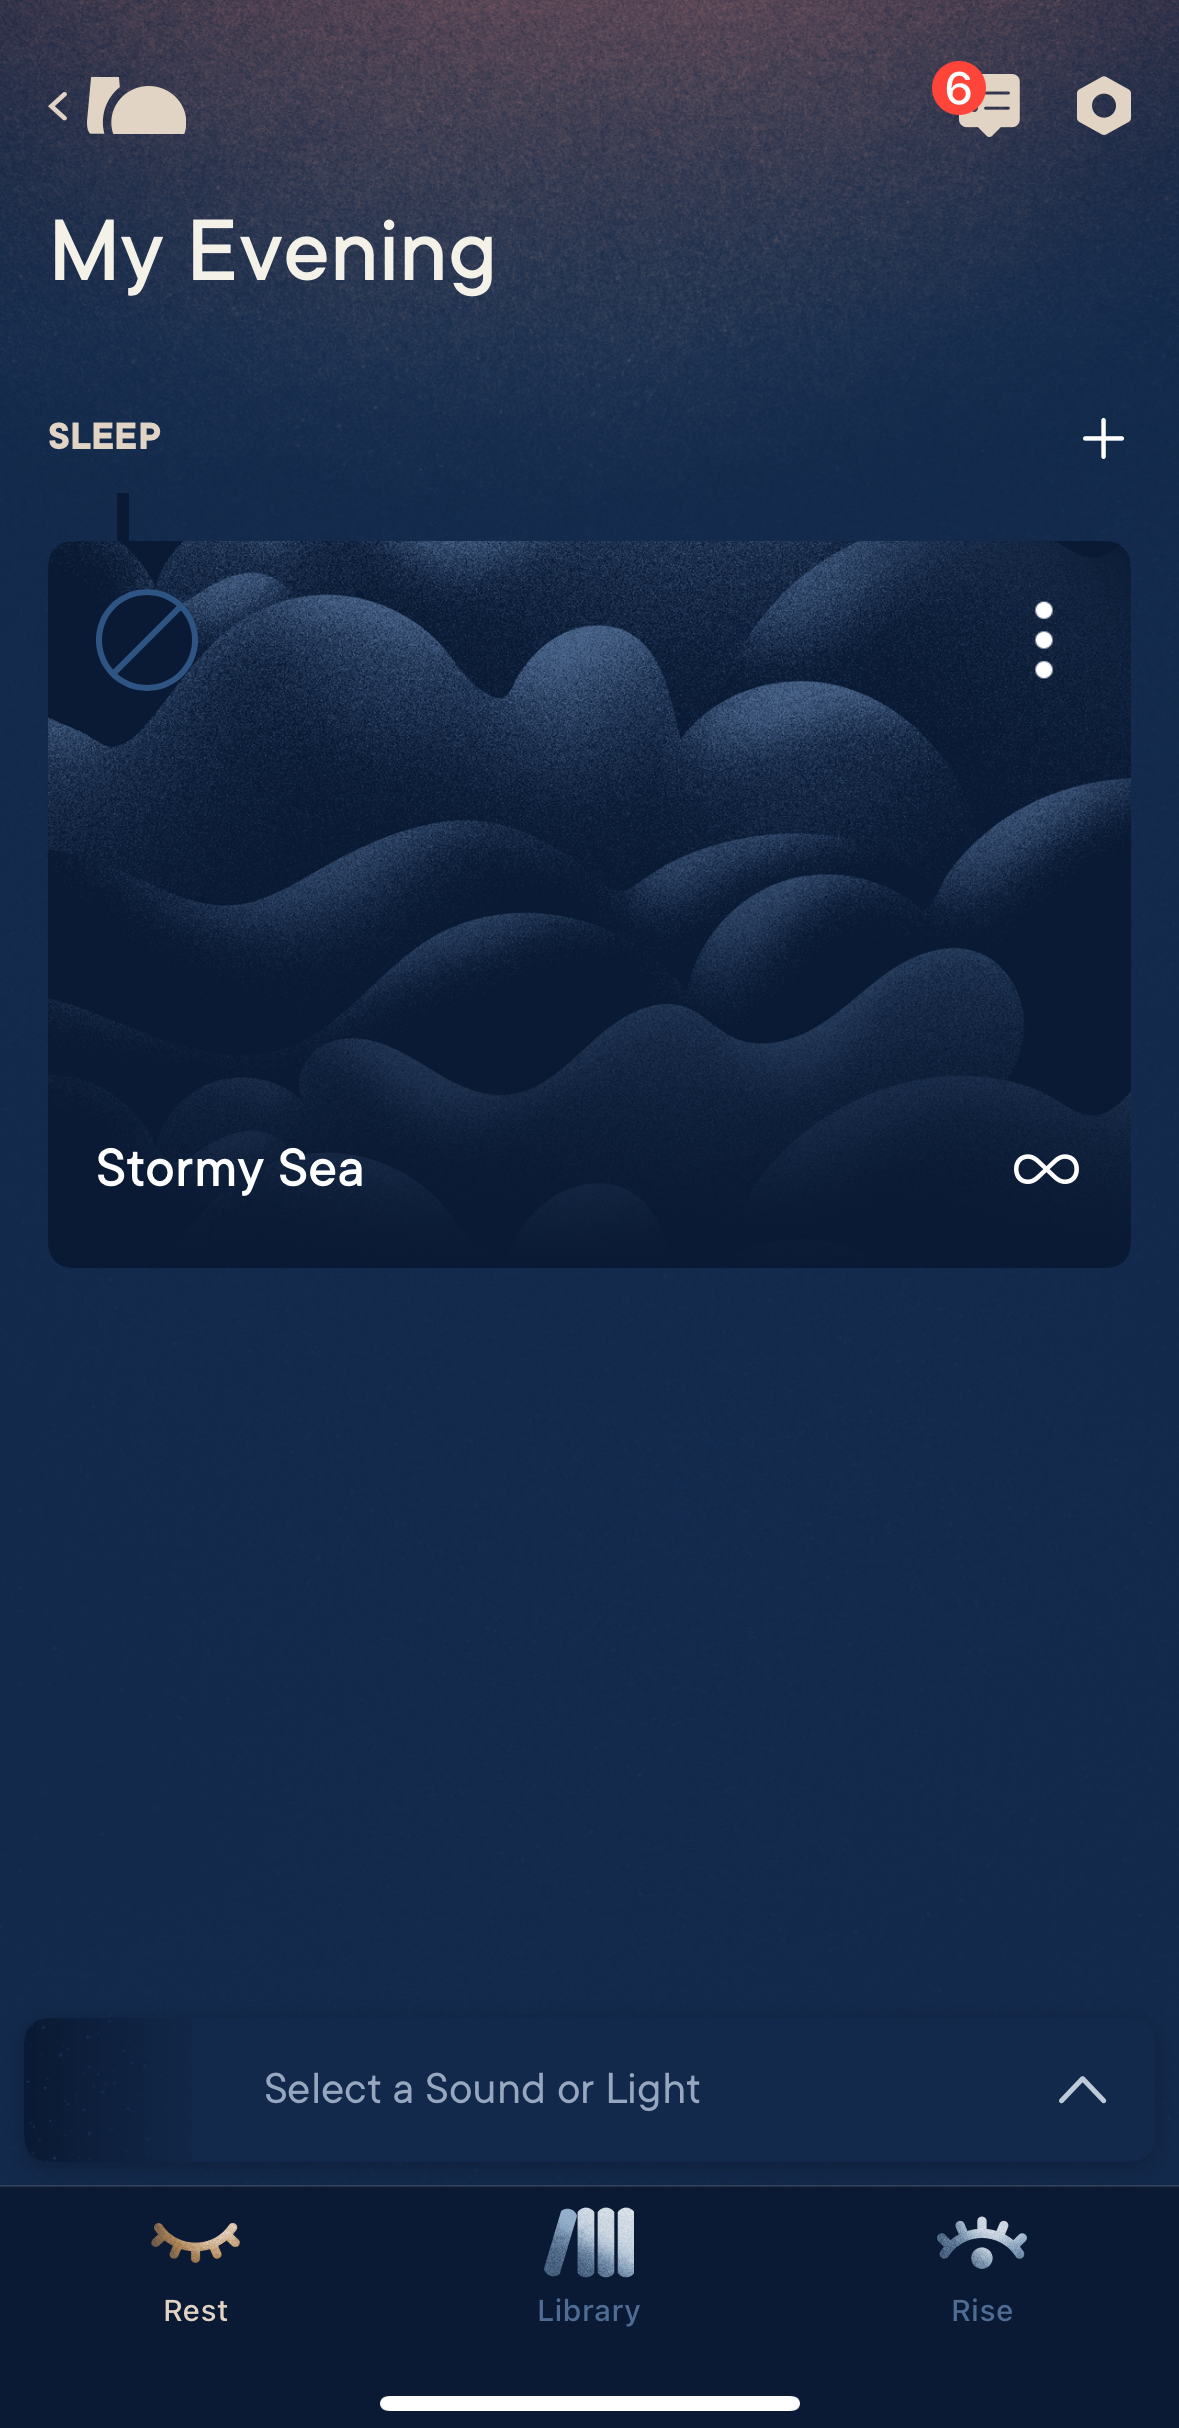 Sleep app interface with &#x27;Stormy Sea&#x27; sound option selected for a relaxing evening routine